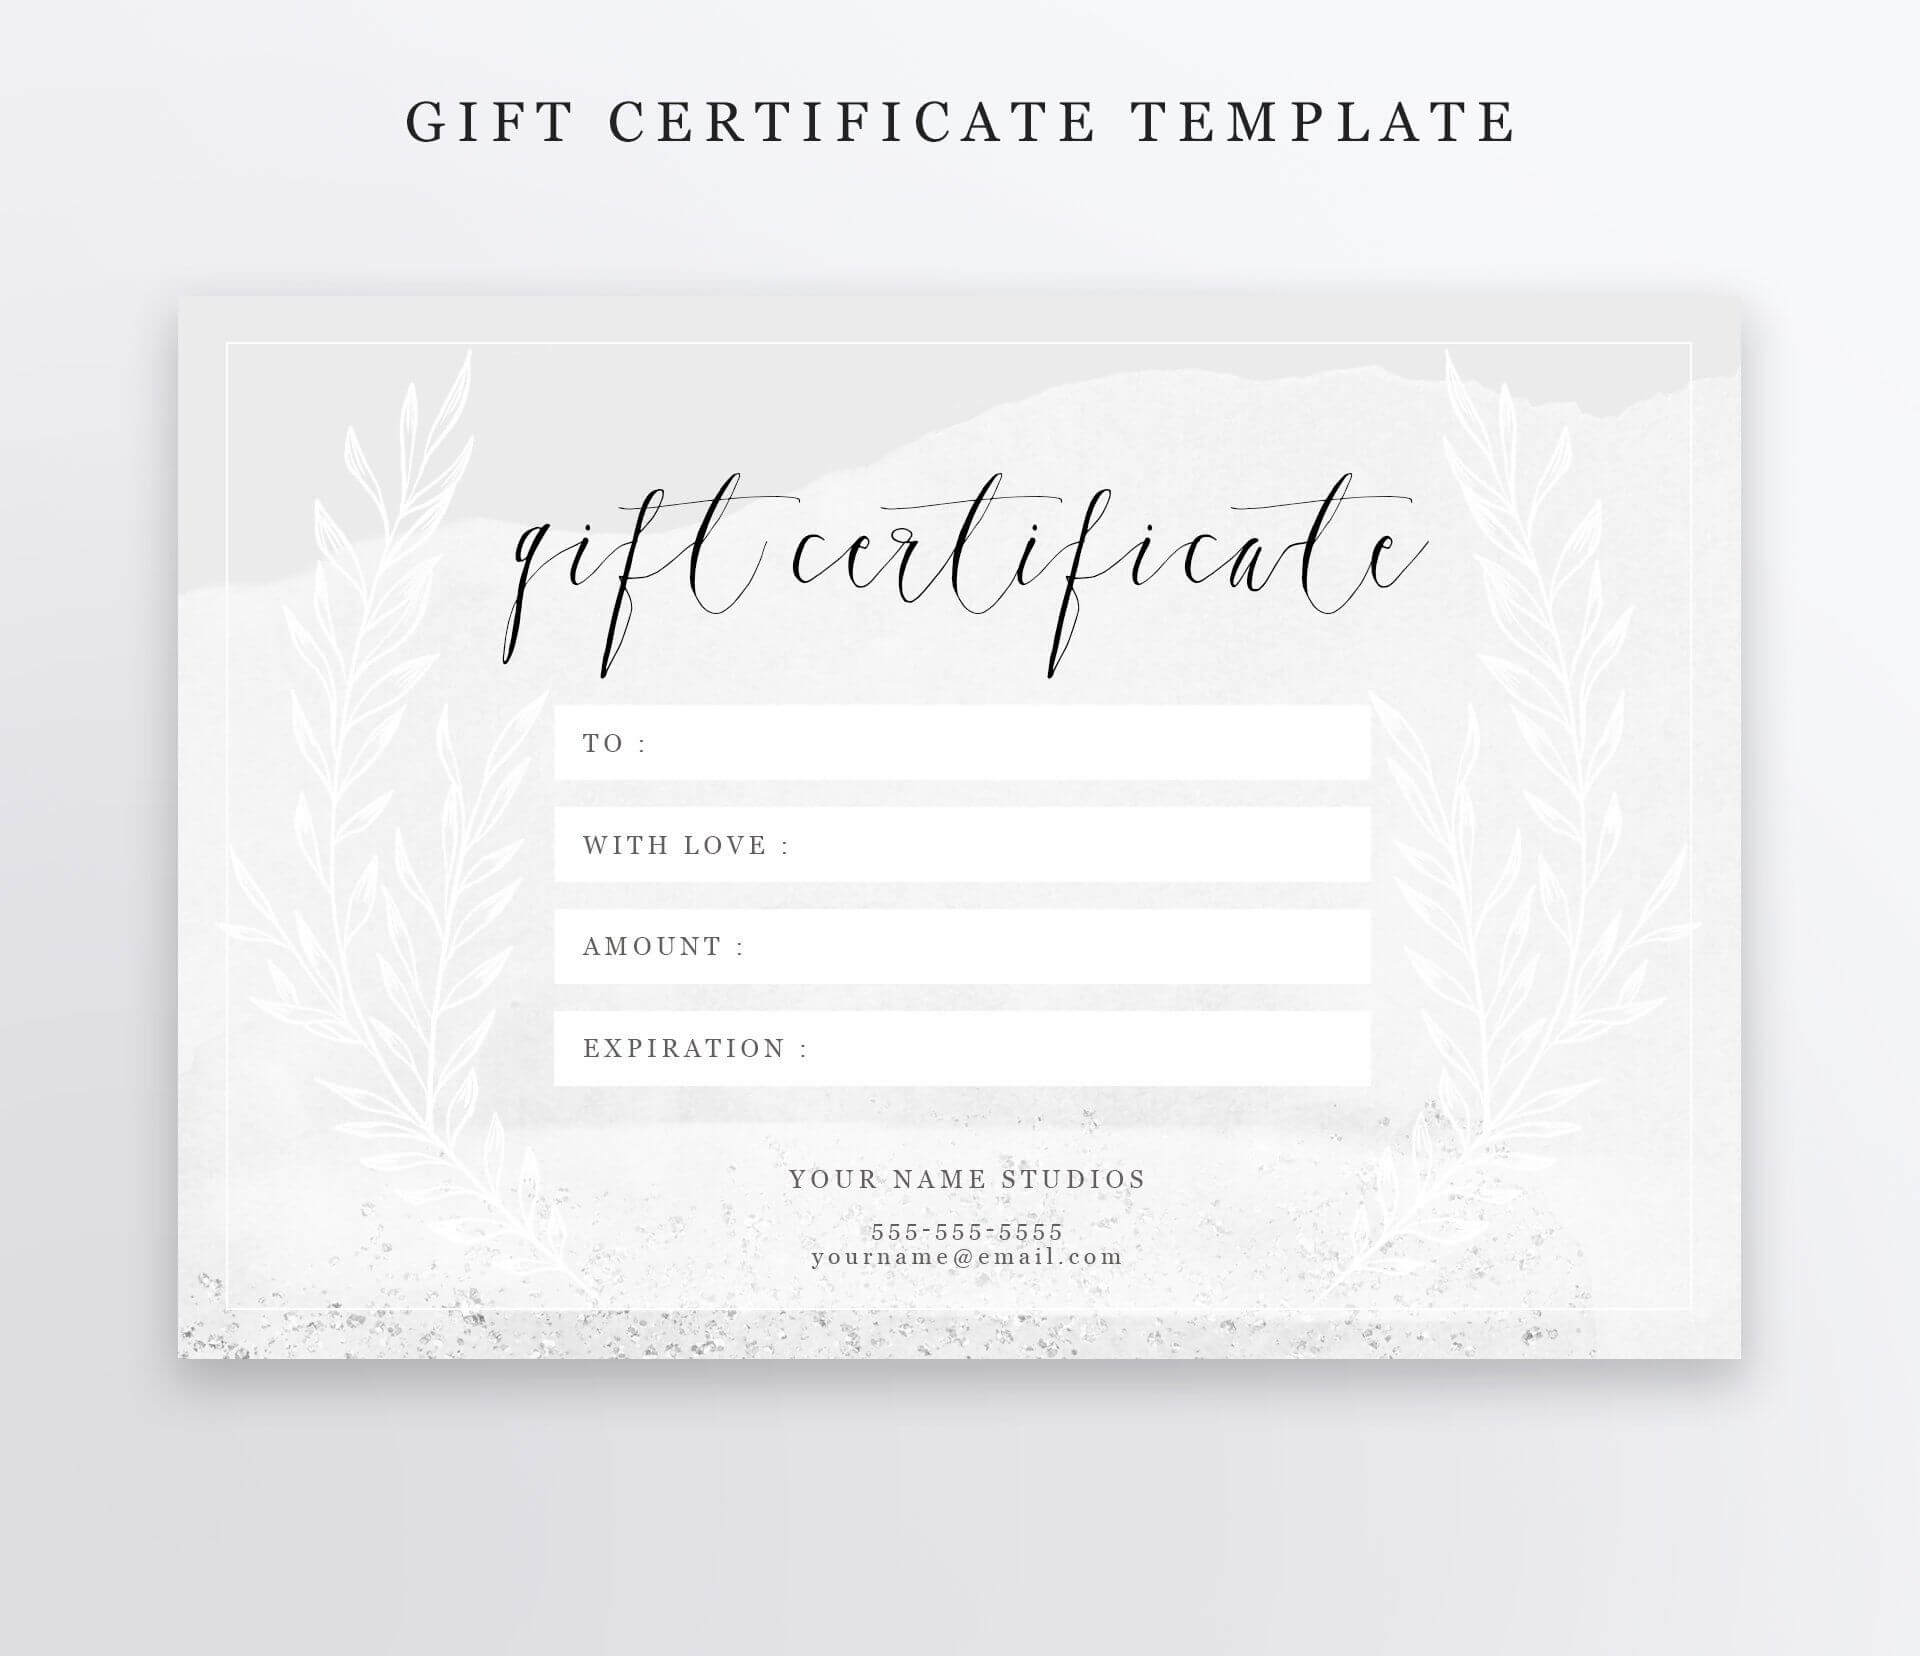 Photography Gift Certificate Template – Psd 4X6 – Editable With Regard To Photoshoot Gift Certificate Template